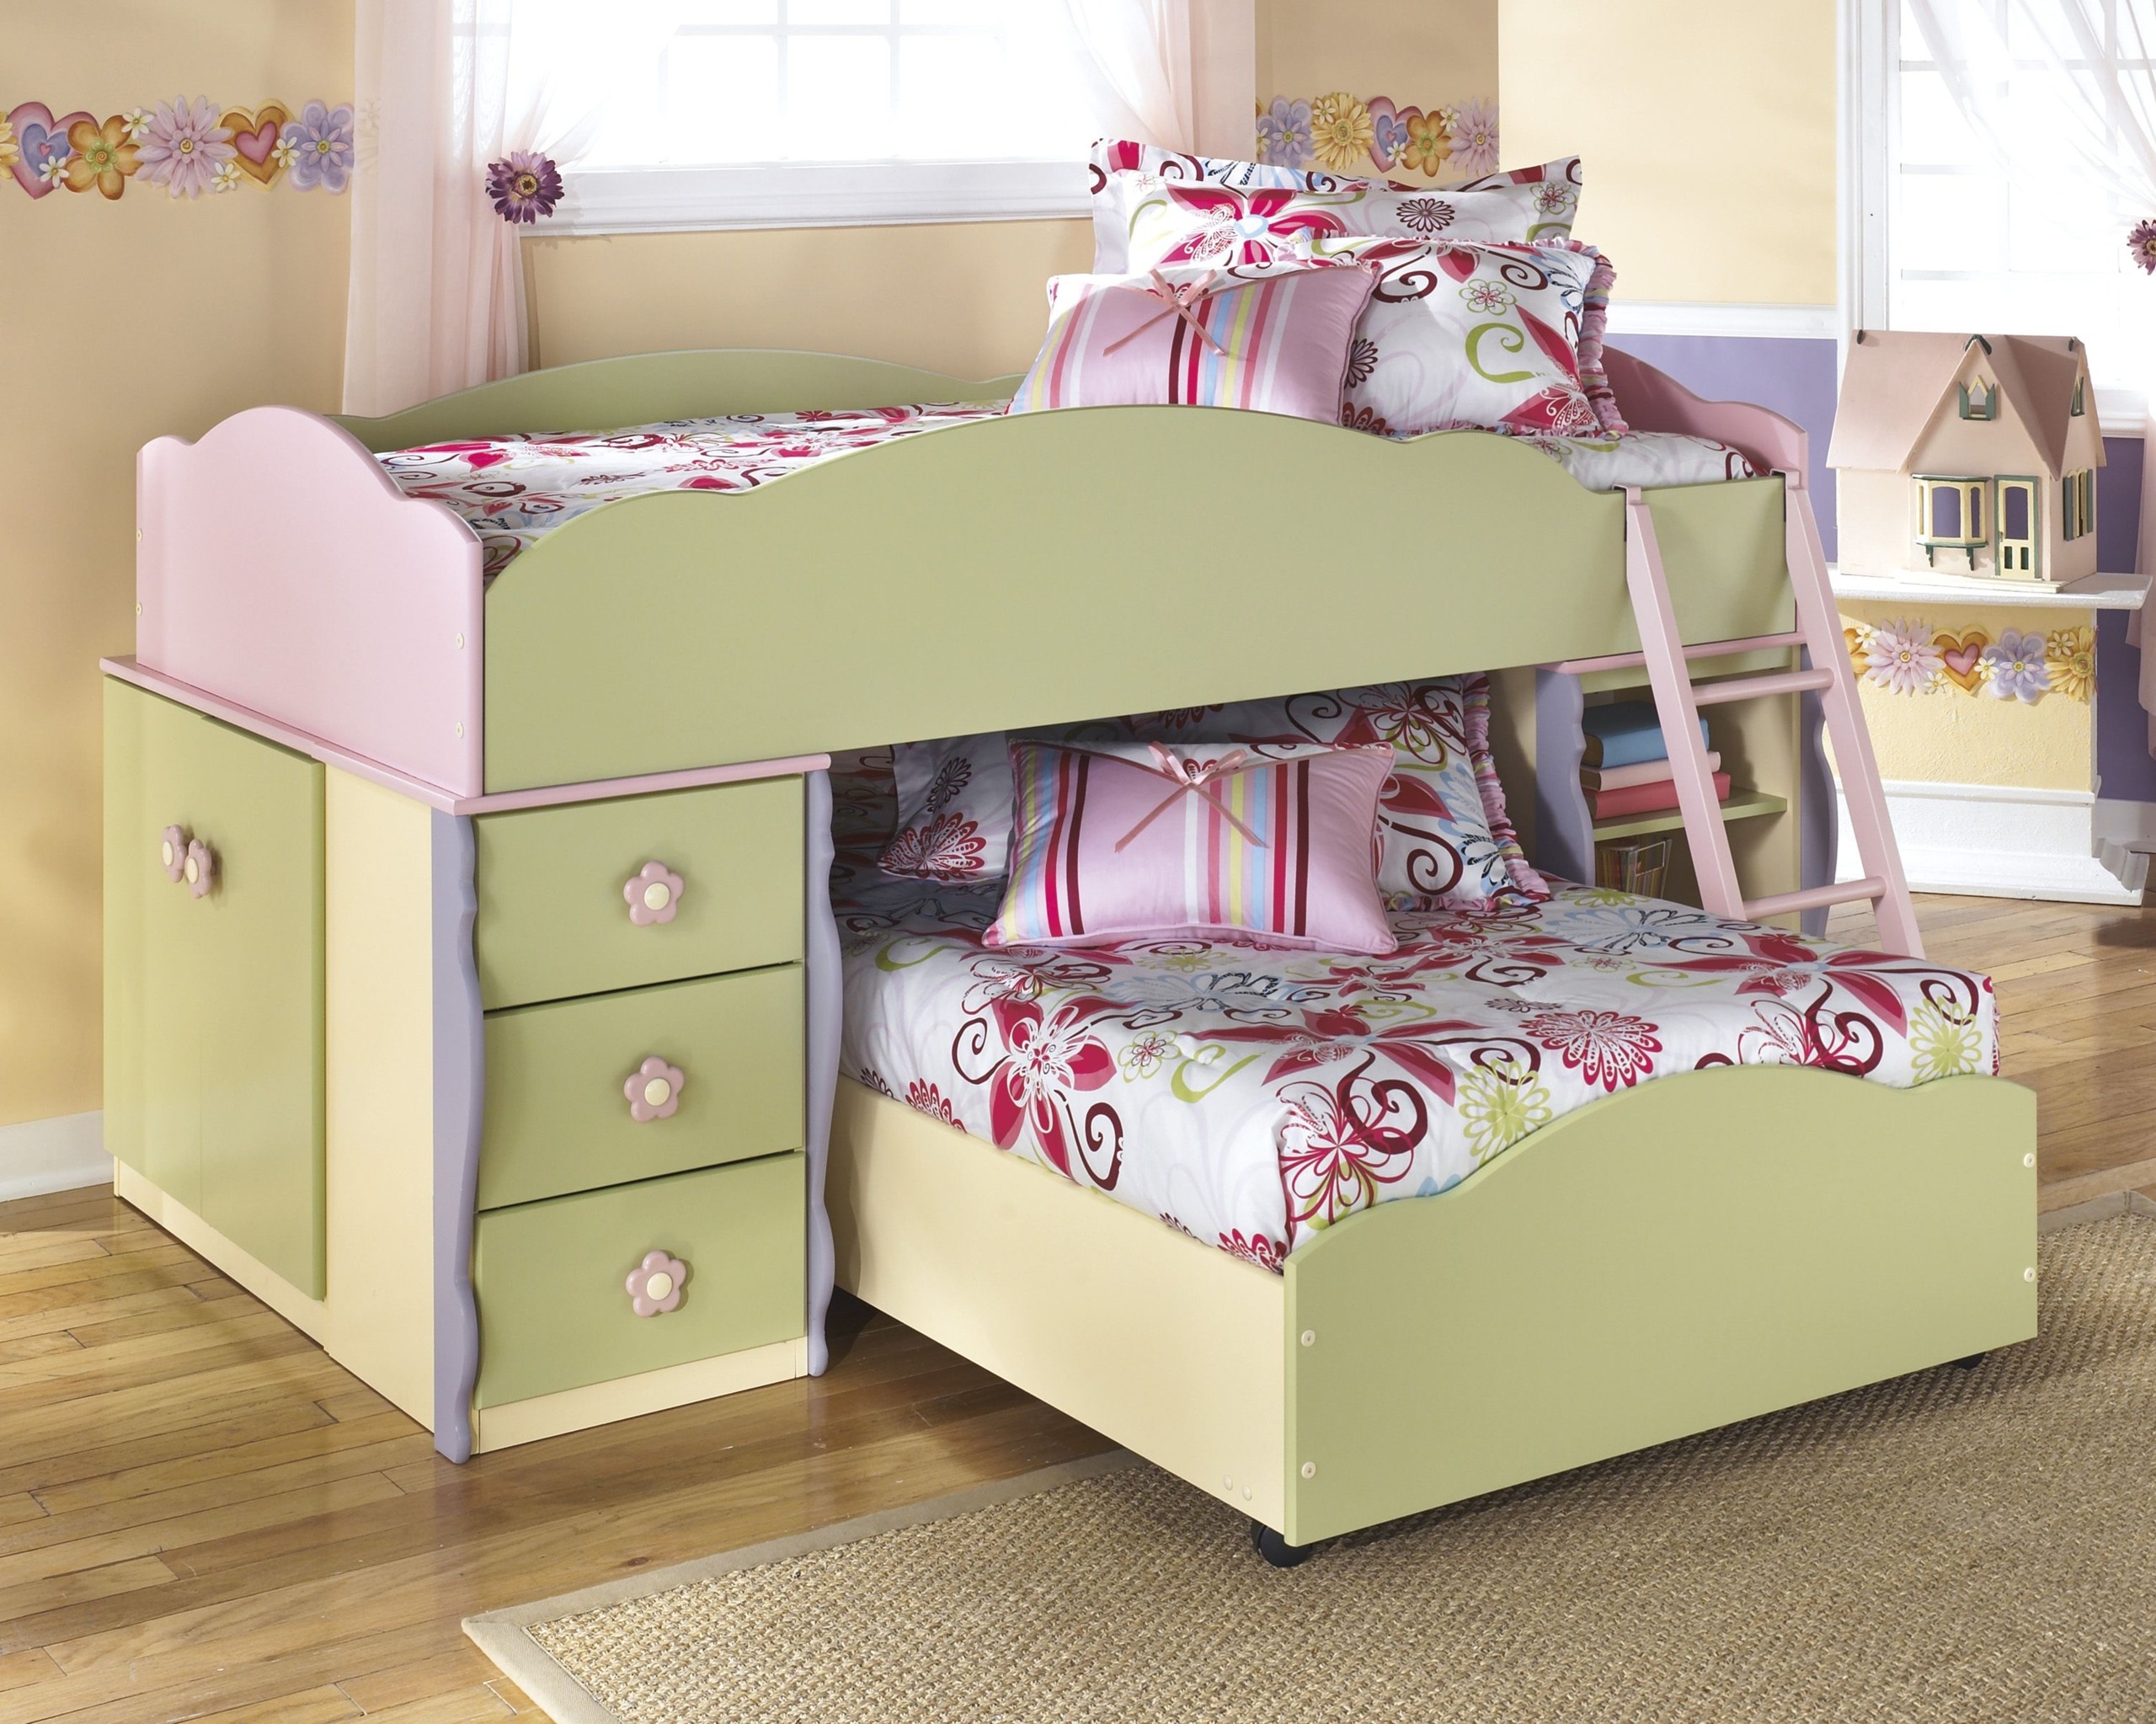 The doll house twin twin loft bunk bed bunk bed